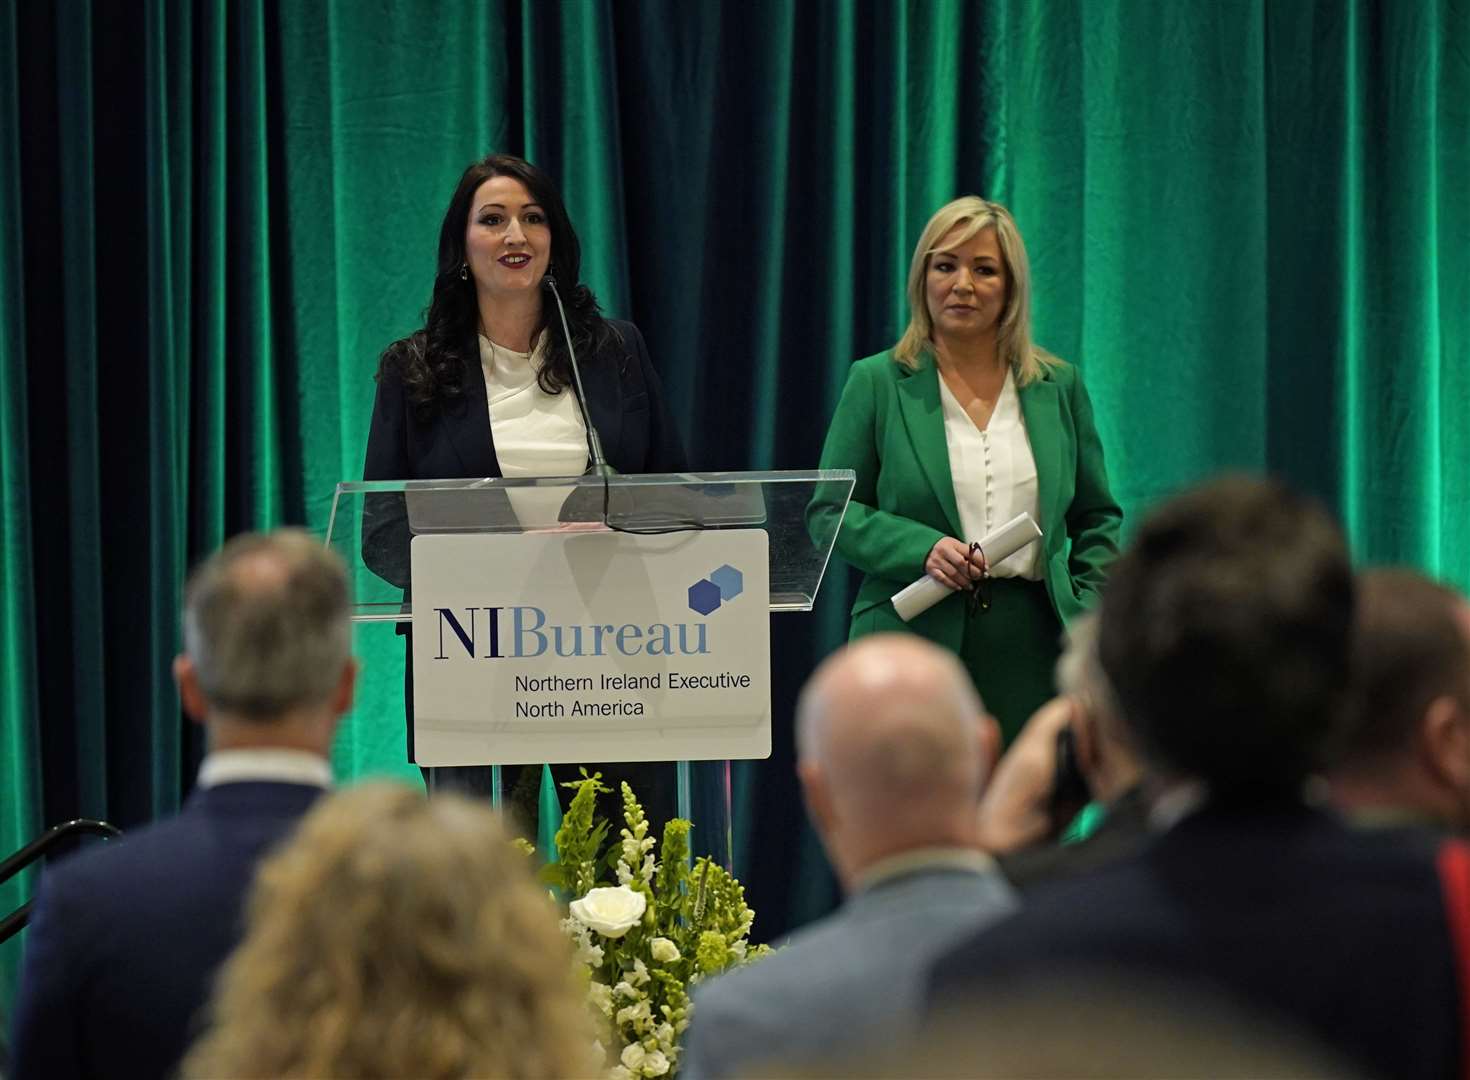 Deputy First Minister Emma Little-Pengelly speaks as Northern Ireland First Minister Michelle O’Neill (right) looks on at the Northern Ireland Bureau breakfast at the Waldorf Astoria Hotel, in Washington DC (Niall Carson/PA)